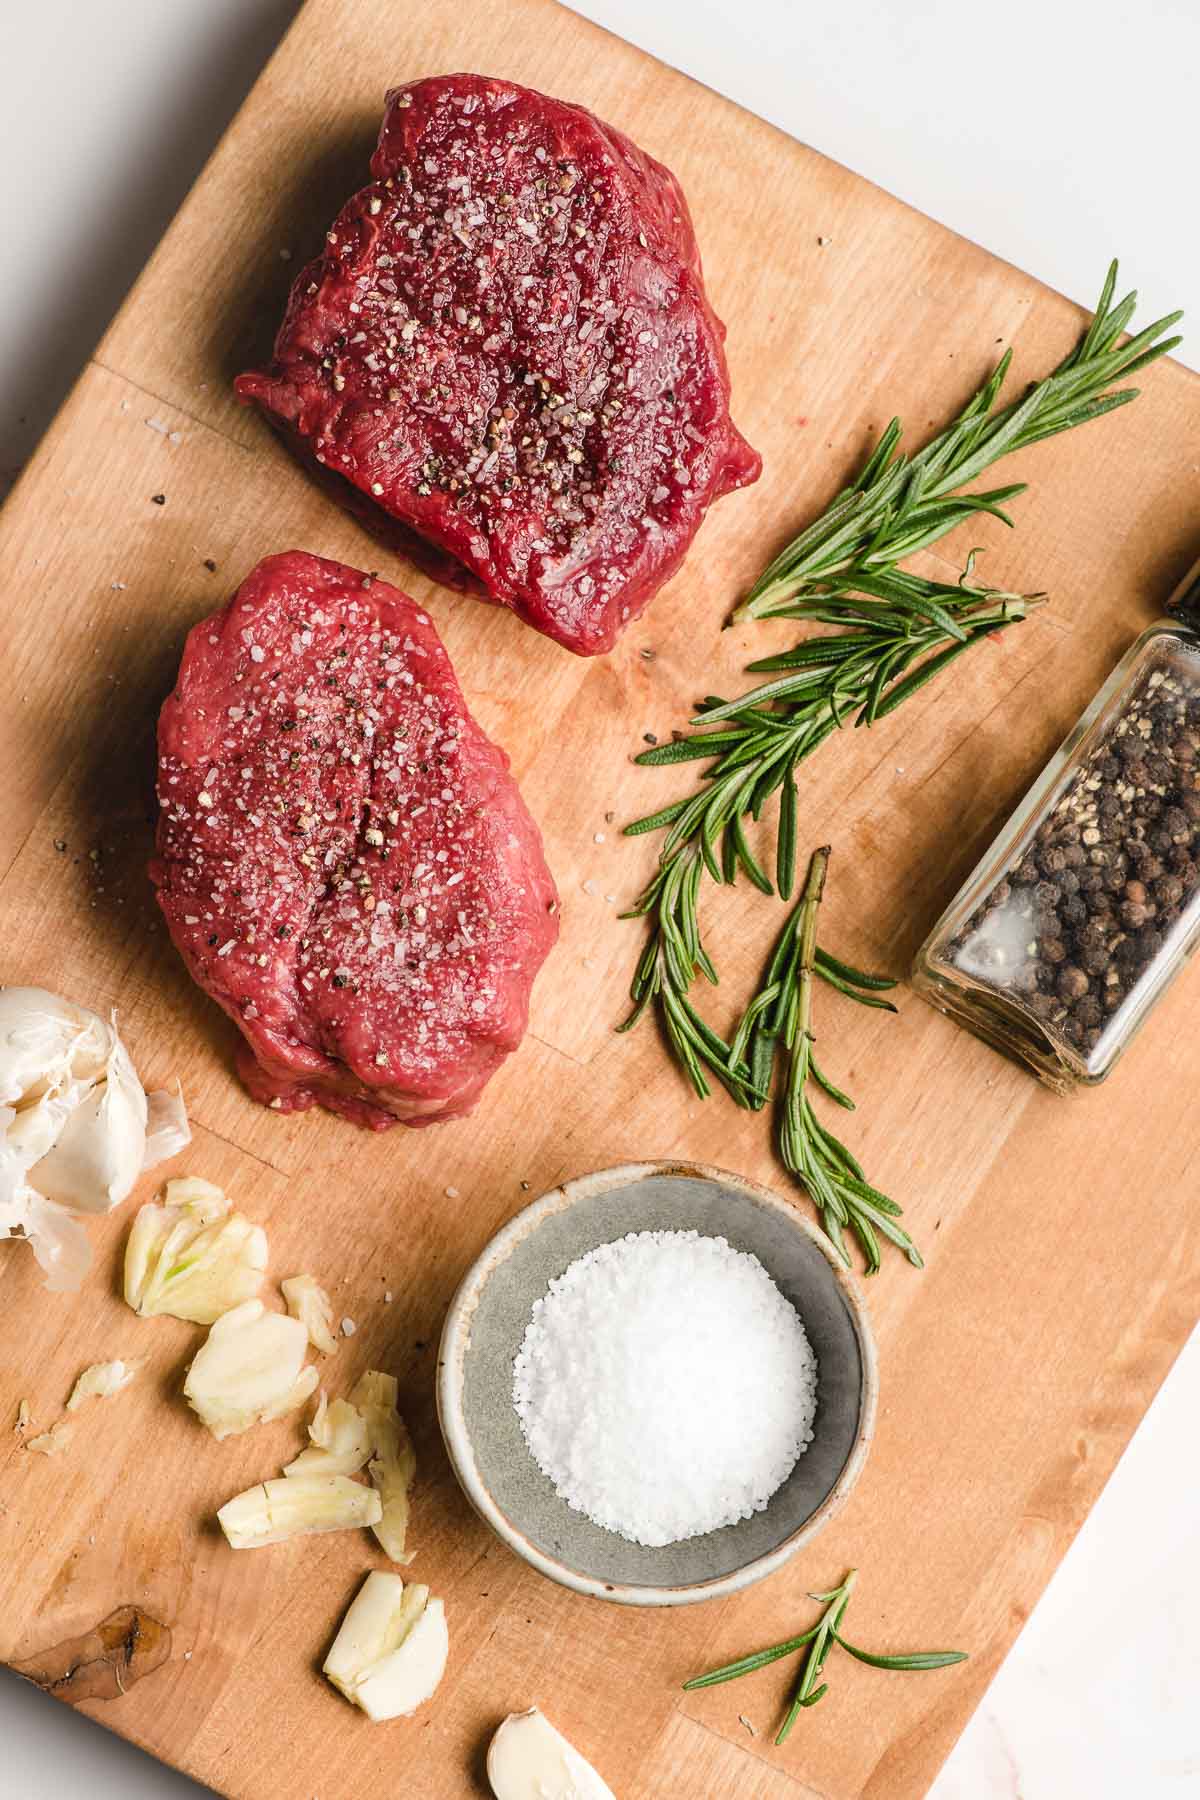 Two filet mignon steaks on a cutting board along with smashed garlic, salt, and rosemary sprigs.